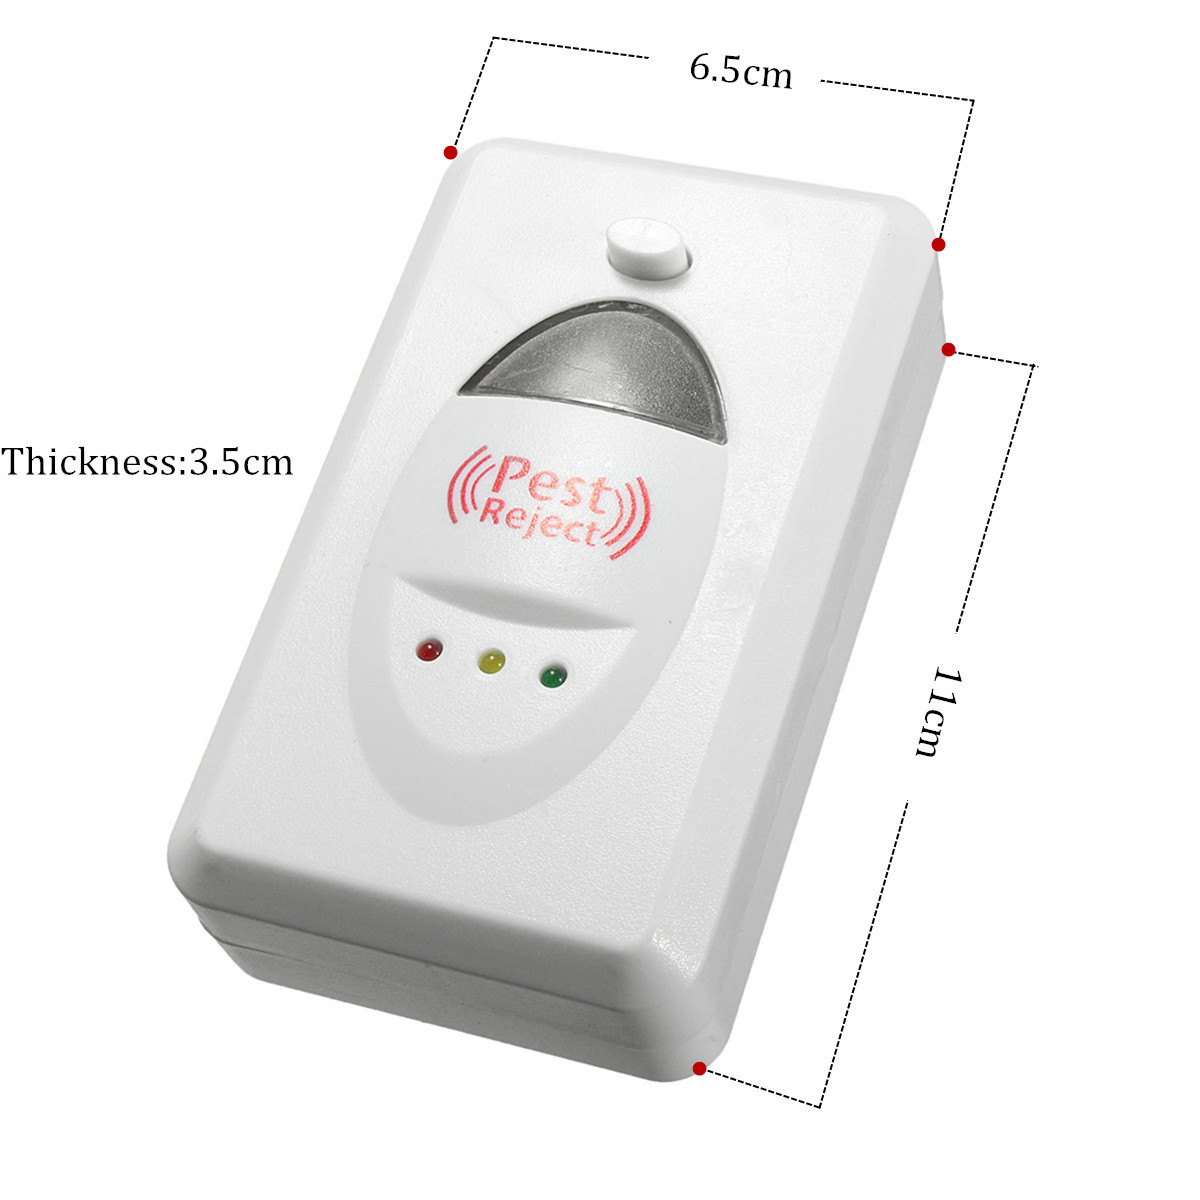 Ultrasonic-Electronic-Pest-Animal-Repeller-Reject-Anti-Mosquito-Bug-Insect-Enhanced-1397436-8